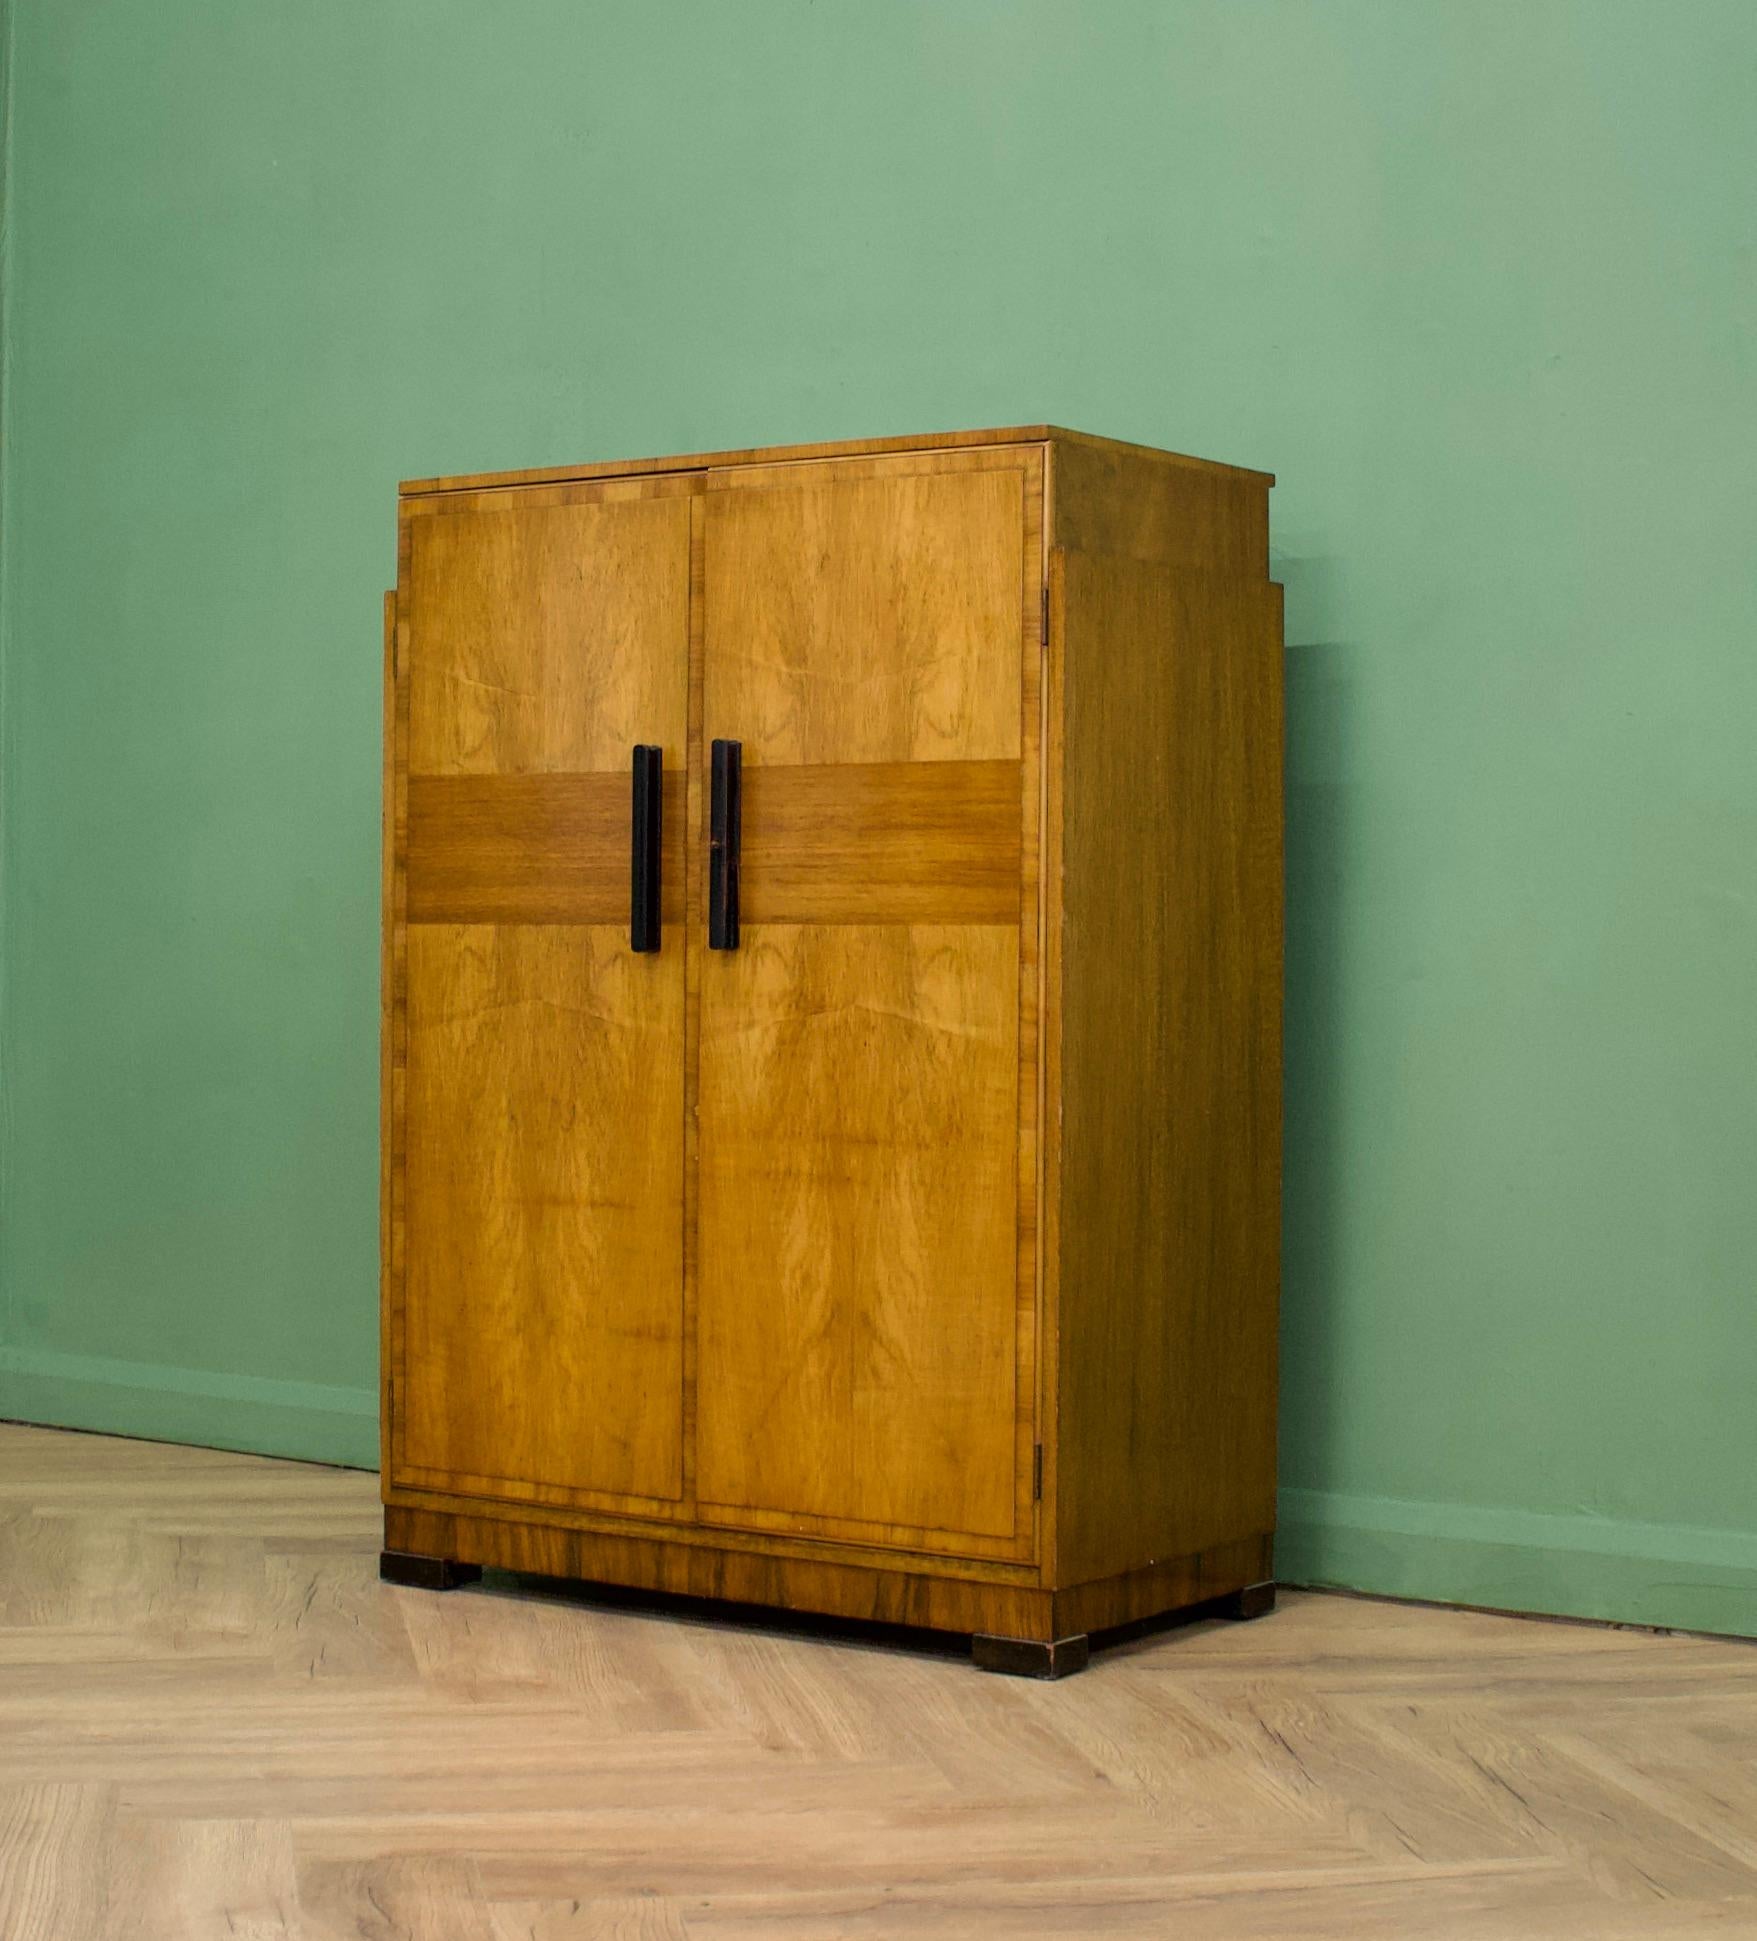 British Art Deco Walnut and Walnut Veneer Compact Wardrobe from Waring and Gillow, 1930s For Sale